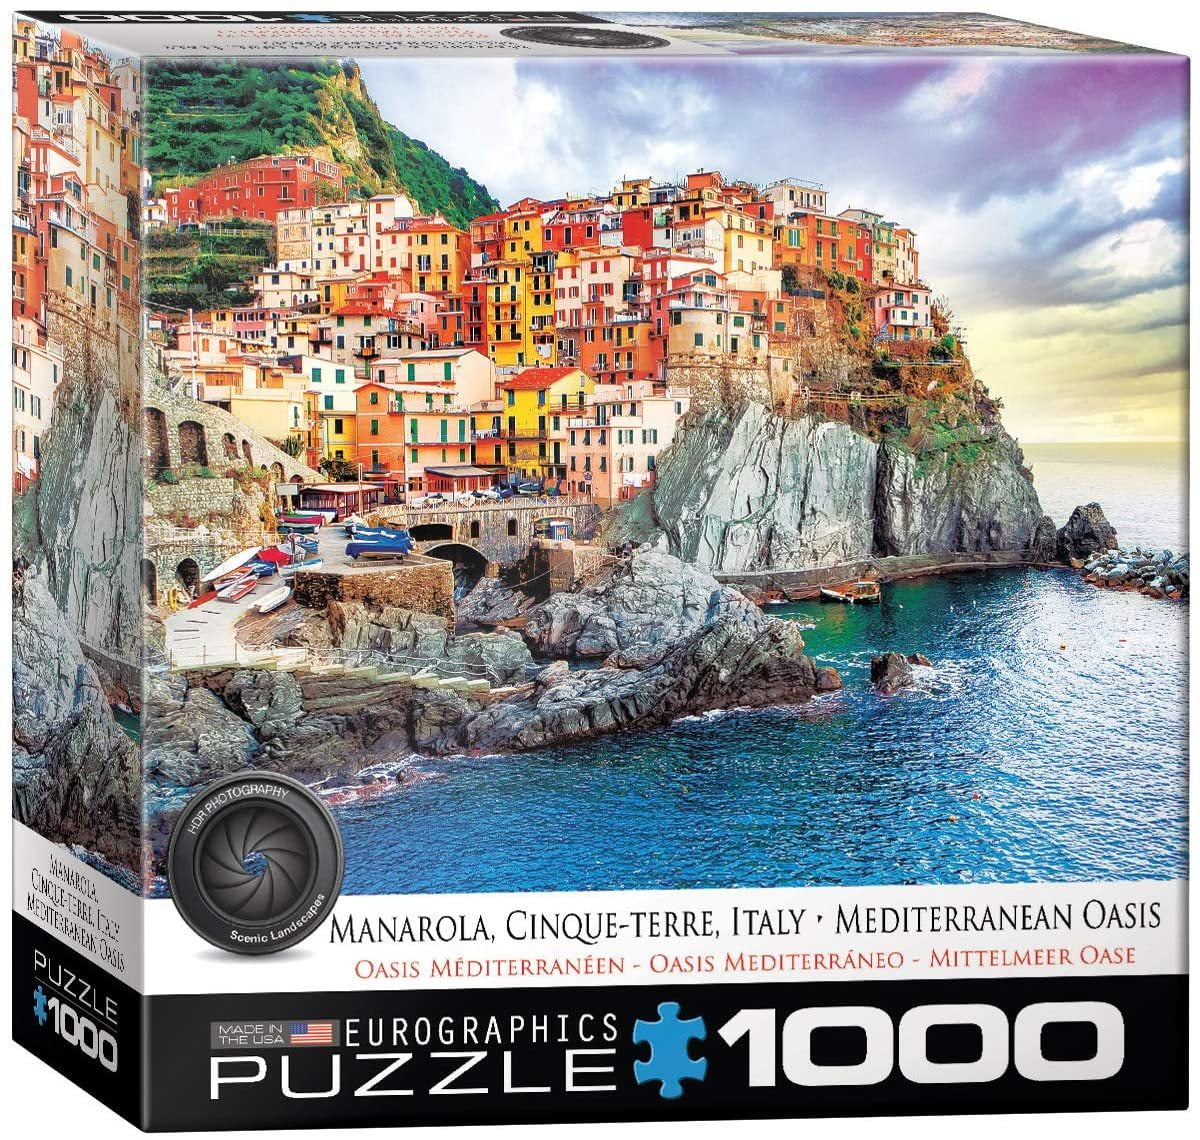 Italy" NEW Art Puzzle Jigsaw 1500 Pc Tiles Pieces "Cinque Terre